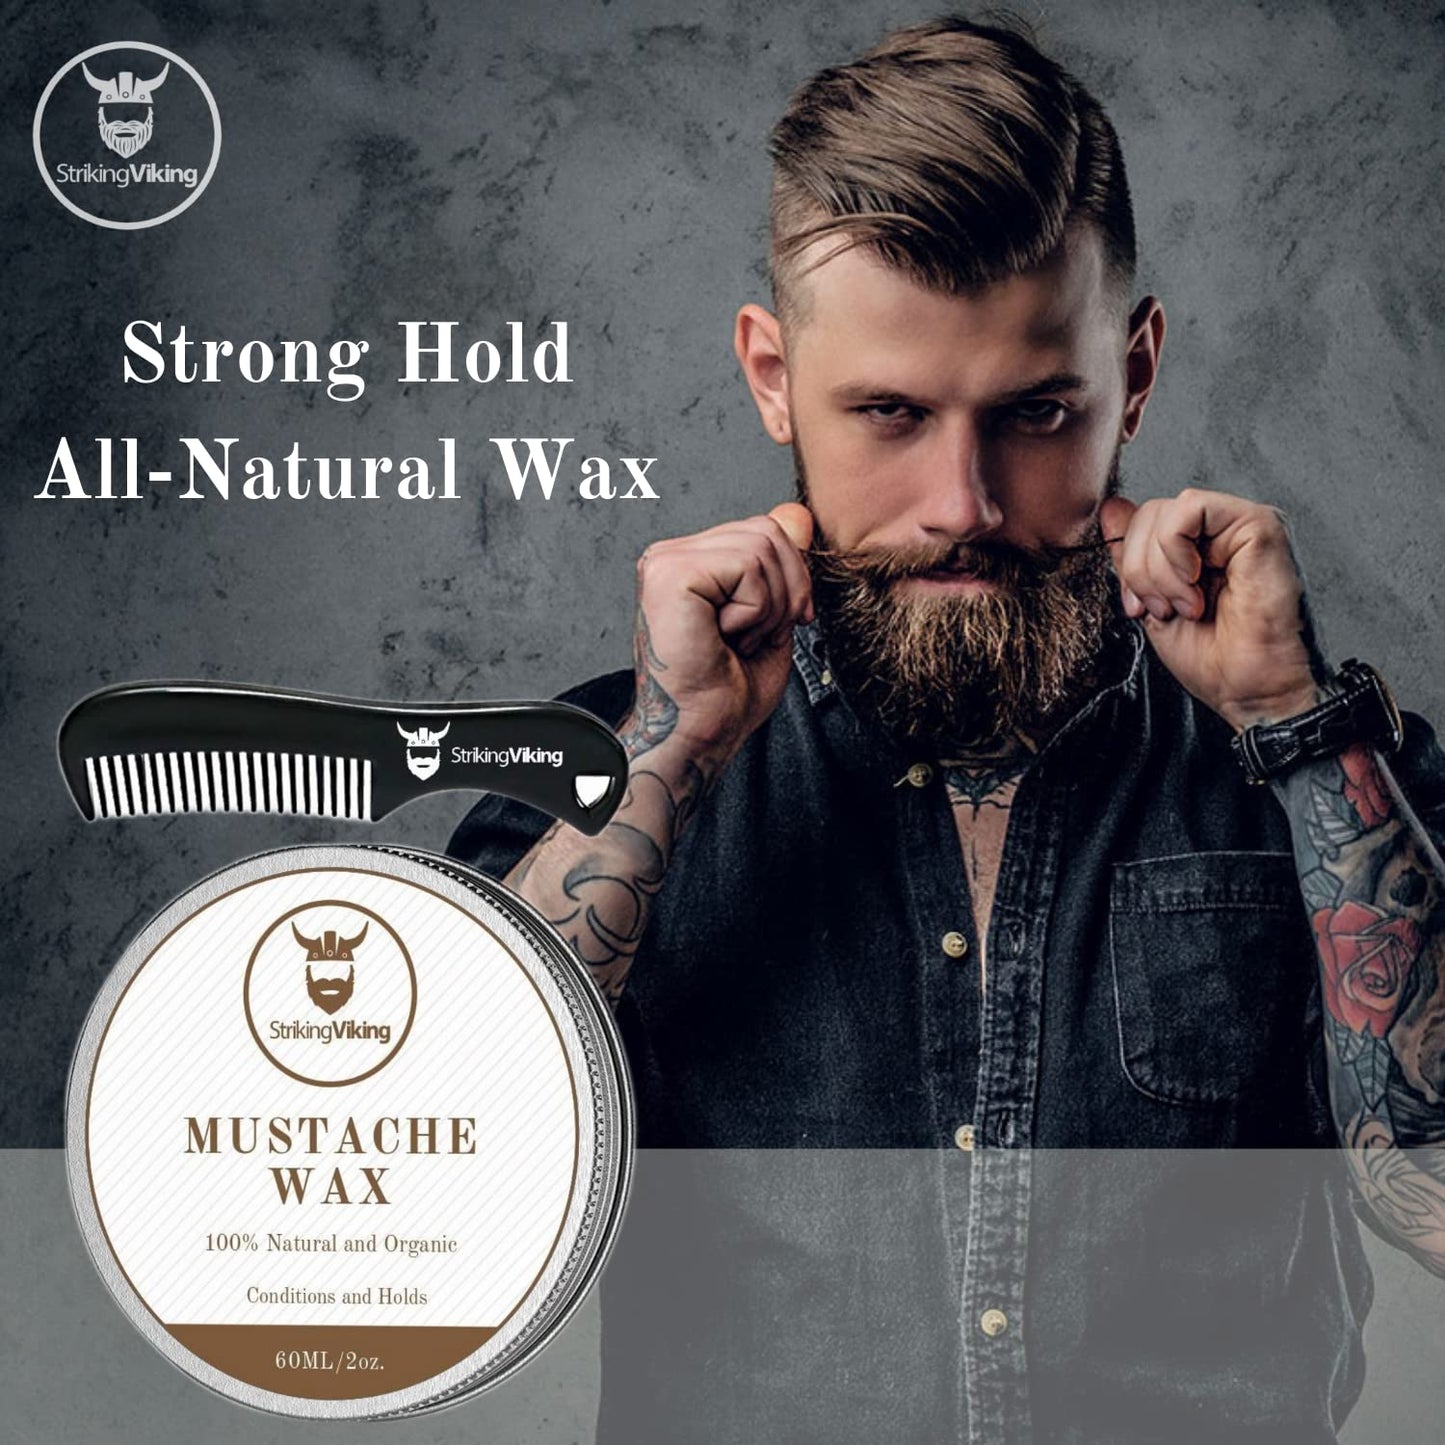 Striking Viking Mustache Wax & Comb Kit - Beard & Moustache Wax For Men With Strong Hold Natural Beeswax - Helps Tame Style & Groom (Sandalwood Scent, 2 Ounce Size) - Mustache Styling Wax